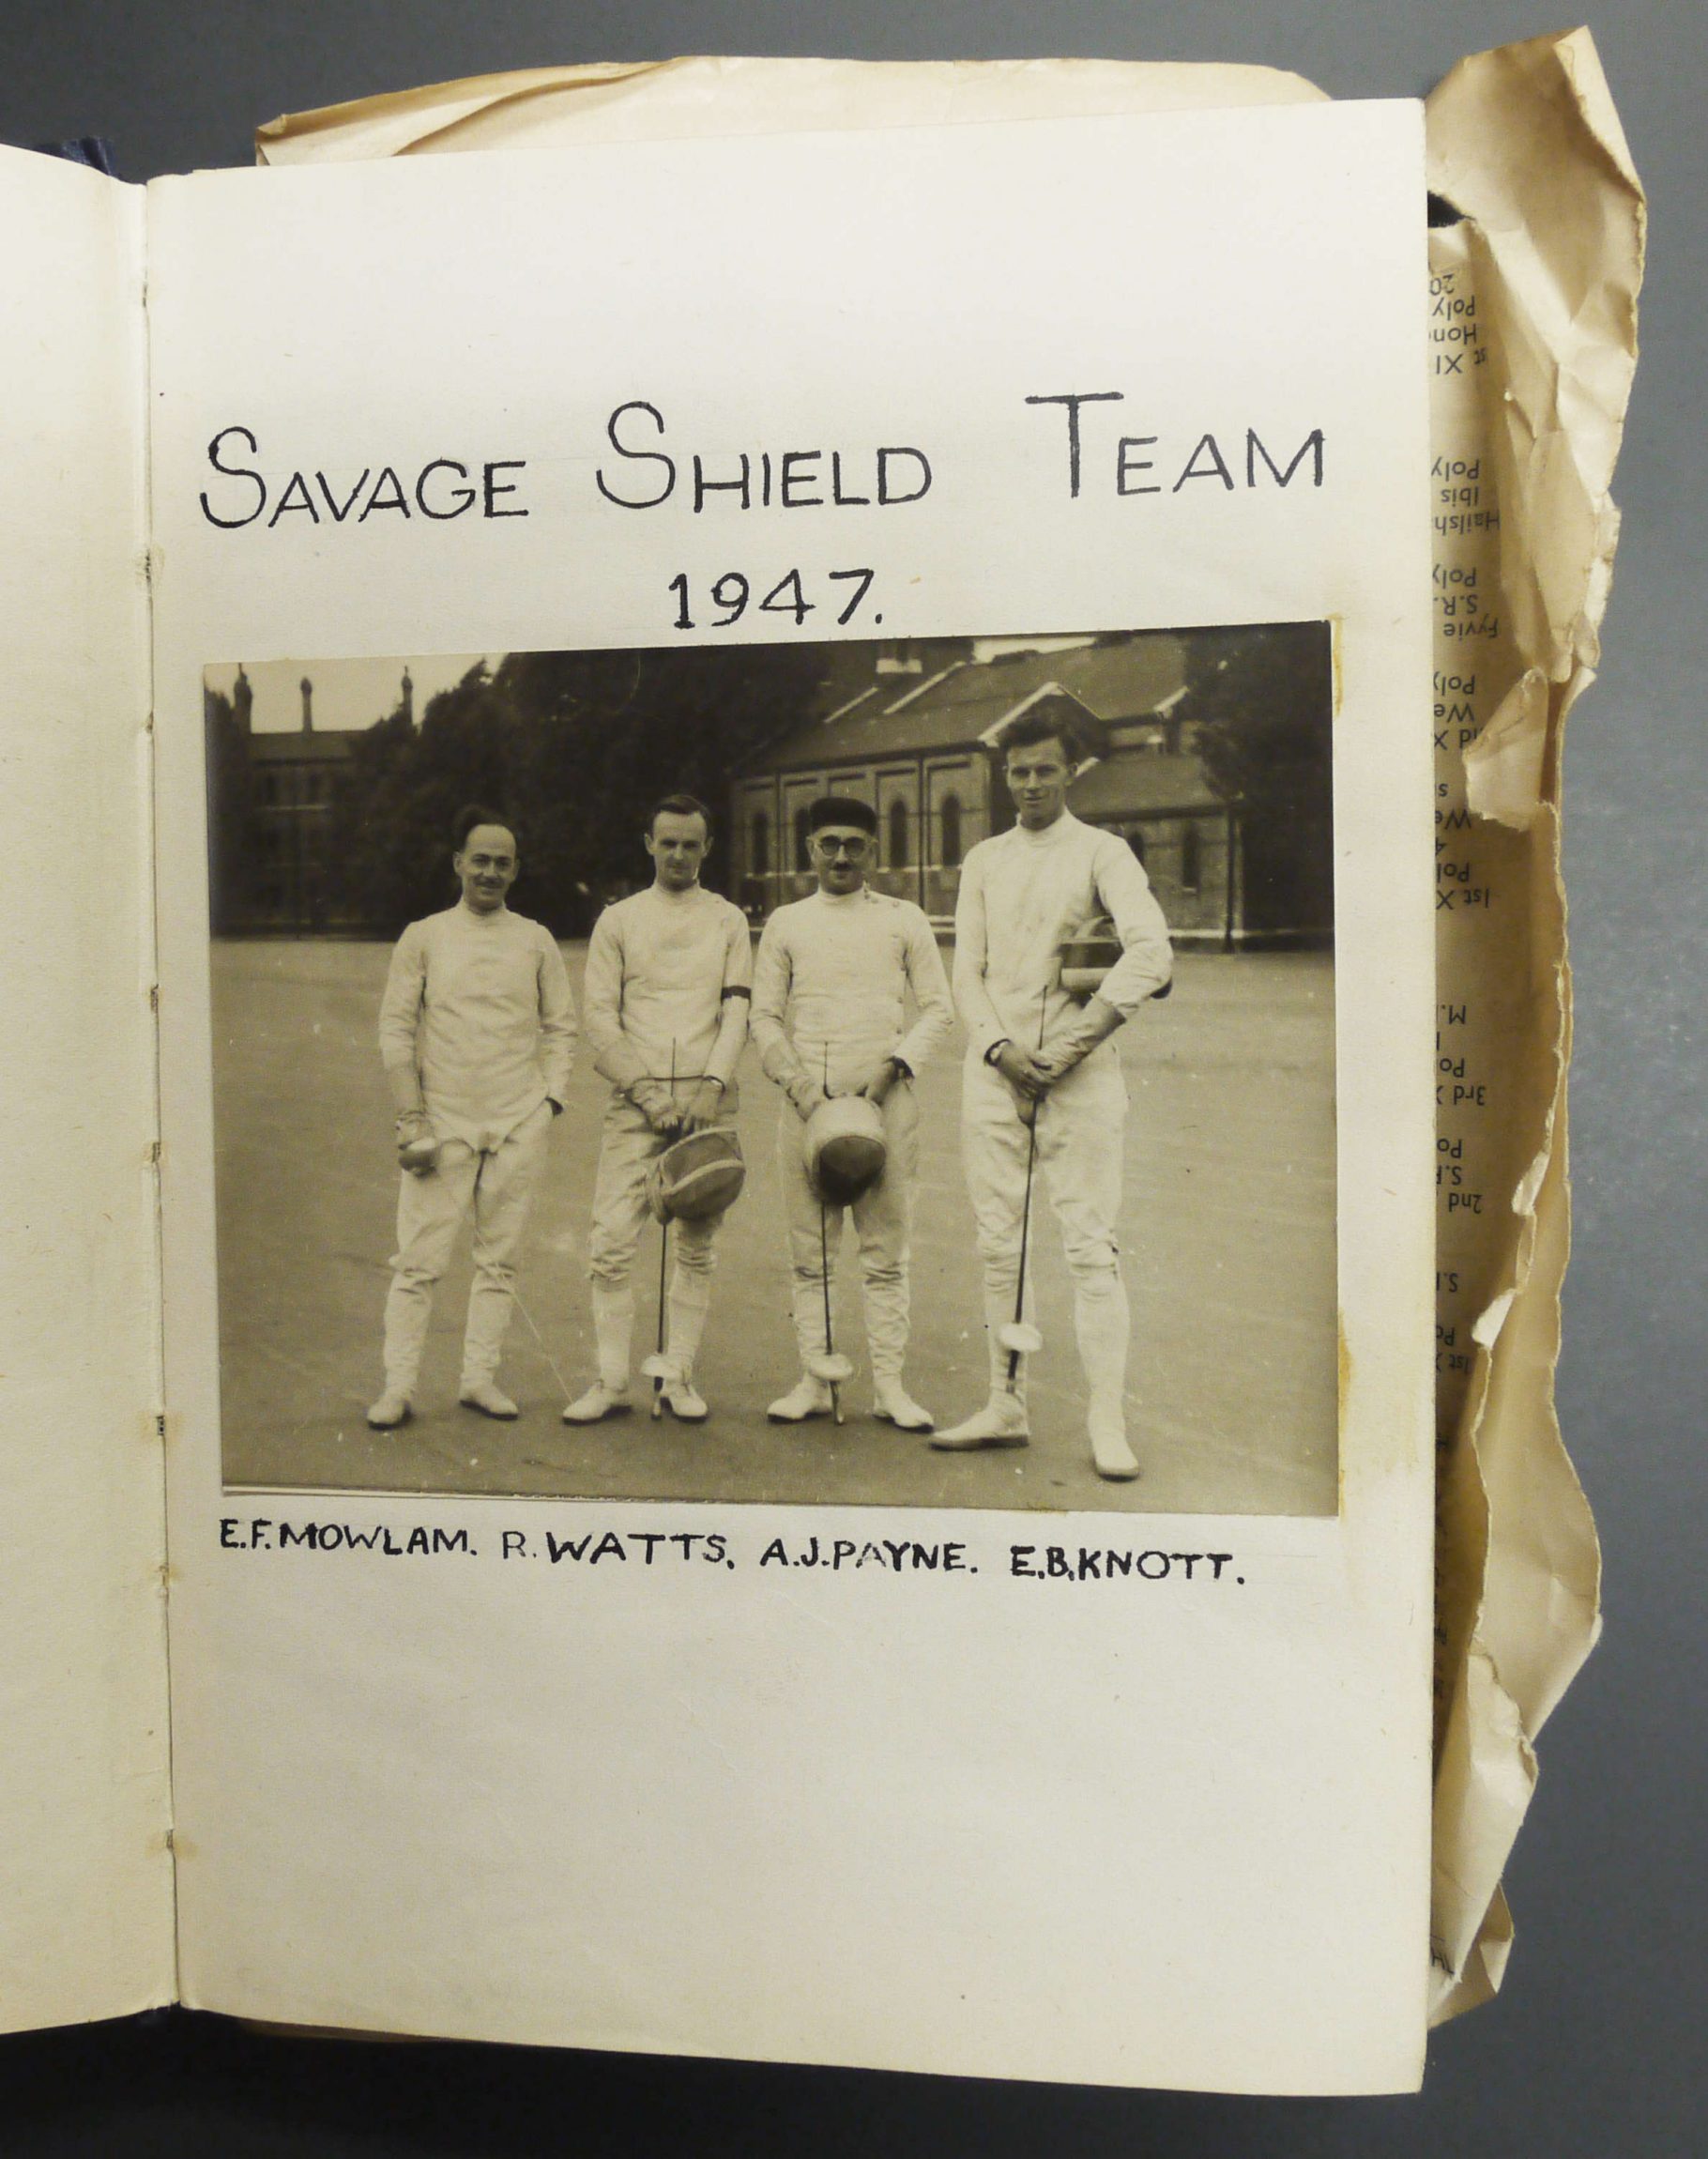 A sample page from a book of magazine clippings from the Polytechnic Fencing Club. The page contains a photograph of four men in fencing kit, labelled a photograph of four men in fencing kit, labelled 'SAVAGE SHIELD TEAM 1947' and 'E.F. MOWLAM. R. WATTS. A.J. PAYNE. E.B.KNOTT'.